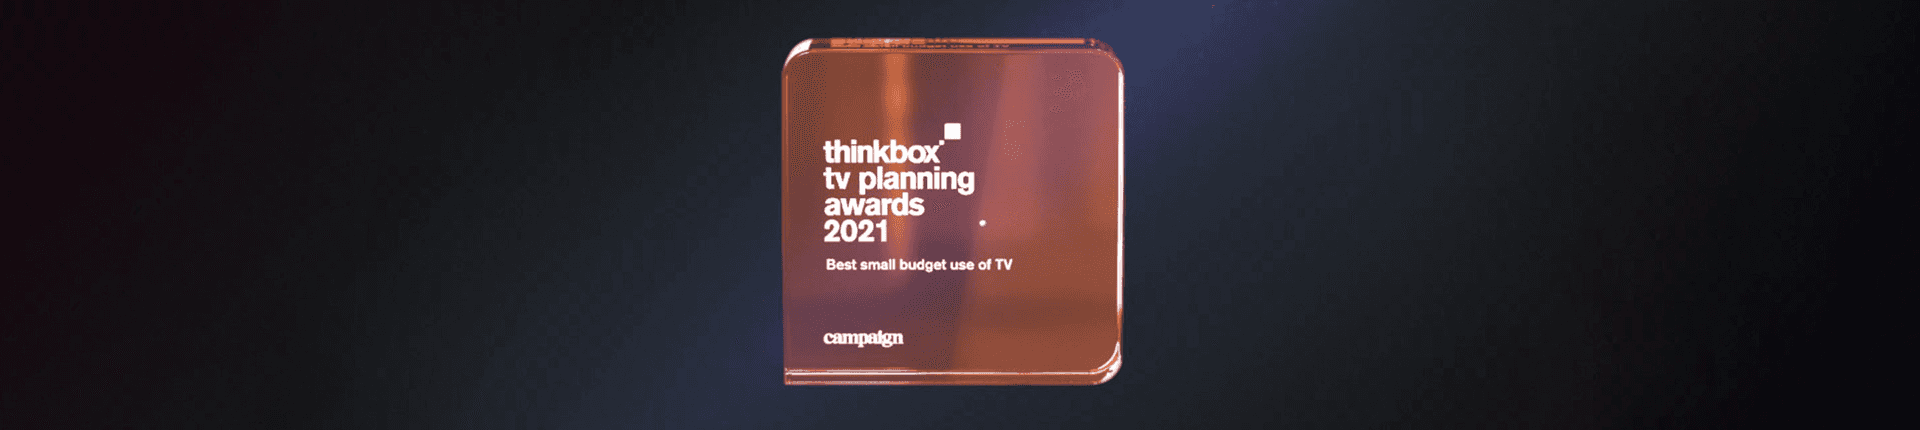 Best small budget use of TV